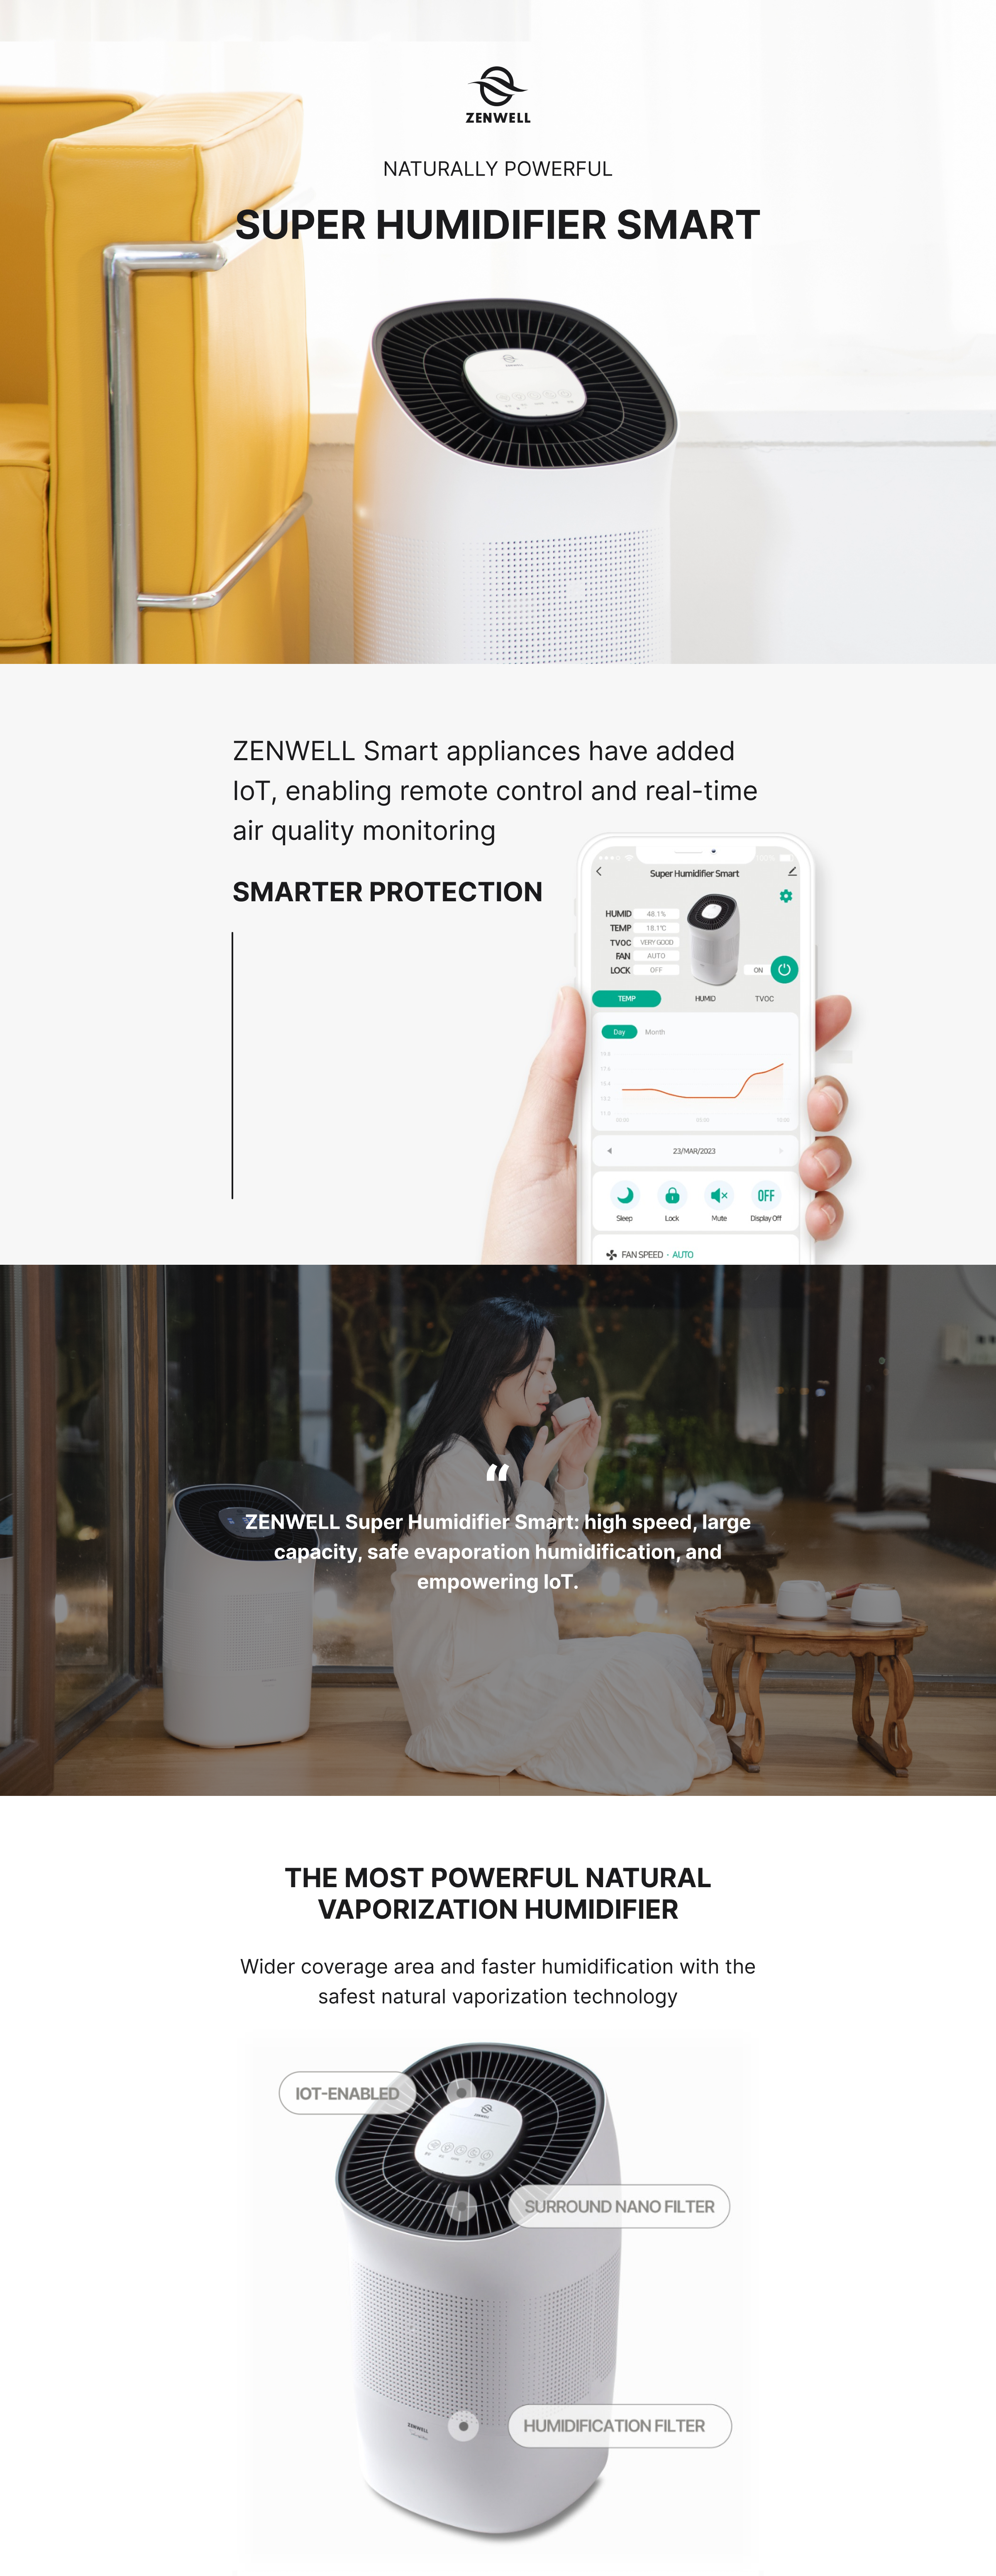 Super Humidifier Smart product description image highlighting the high speed, large capacity, and safe evaporation humidification and the added IOT mobile app that allows remote control and real-time air quality monitoring. 